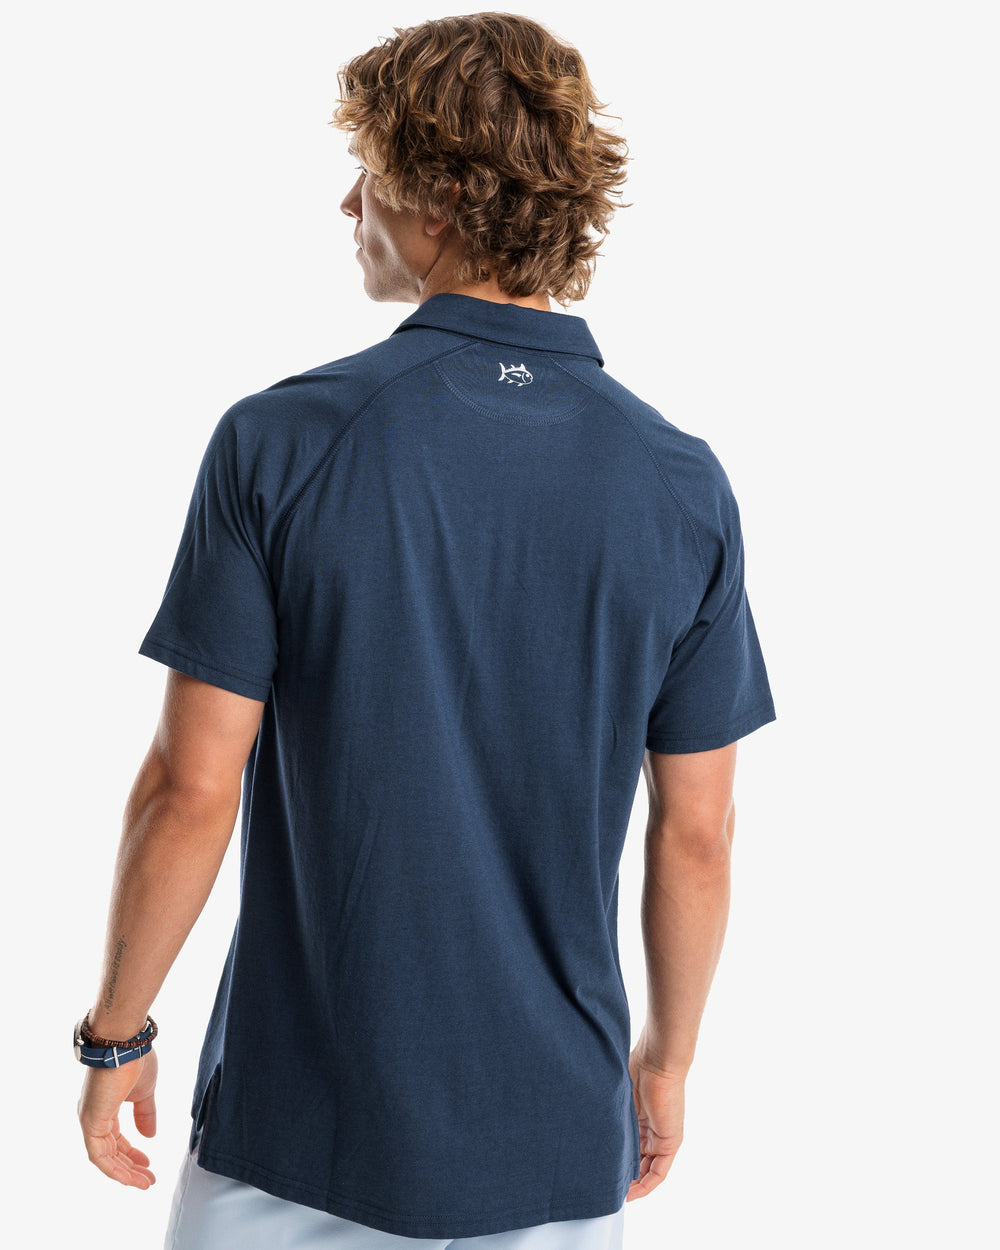 The model back view of the Men's Racquet Performance Polo Shirt by Southern Tide - True Navy